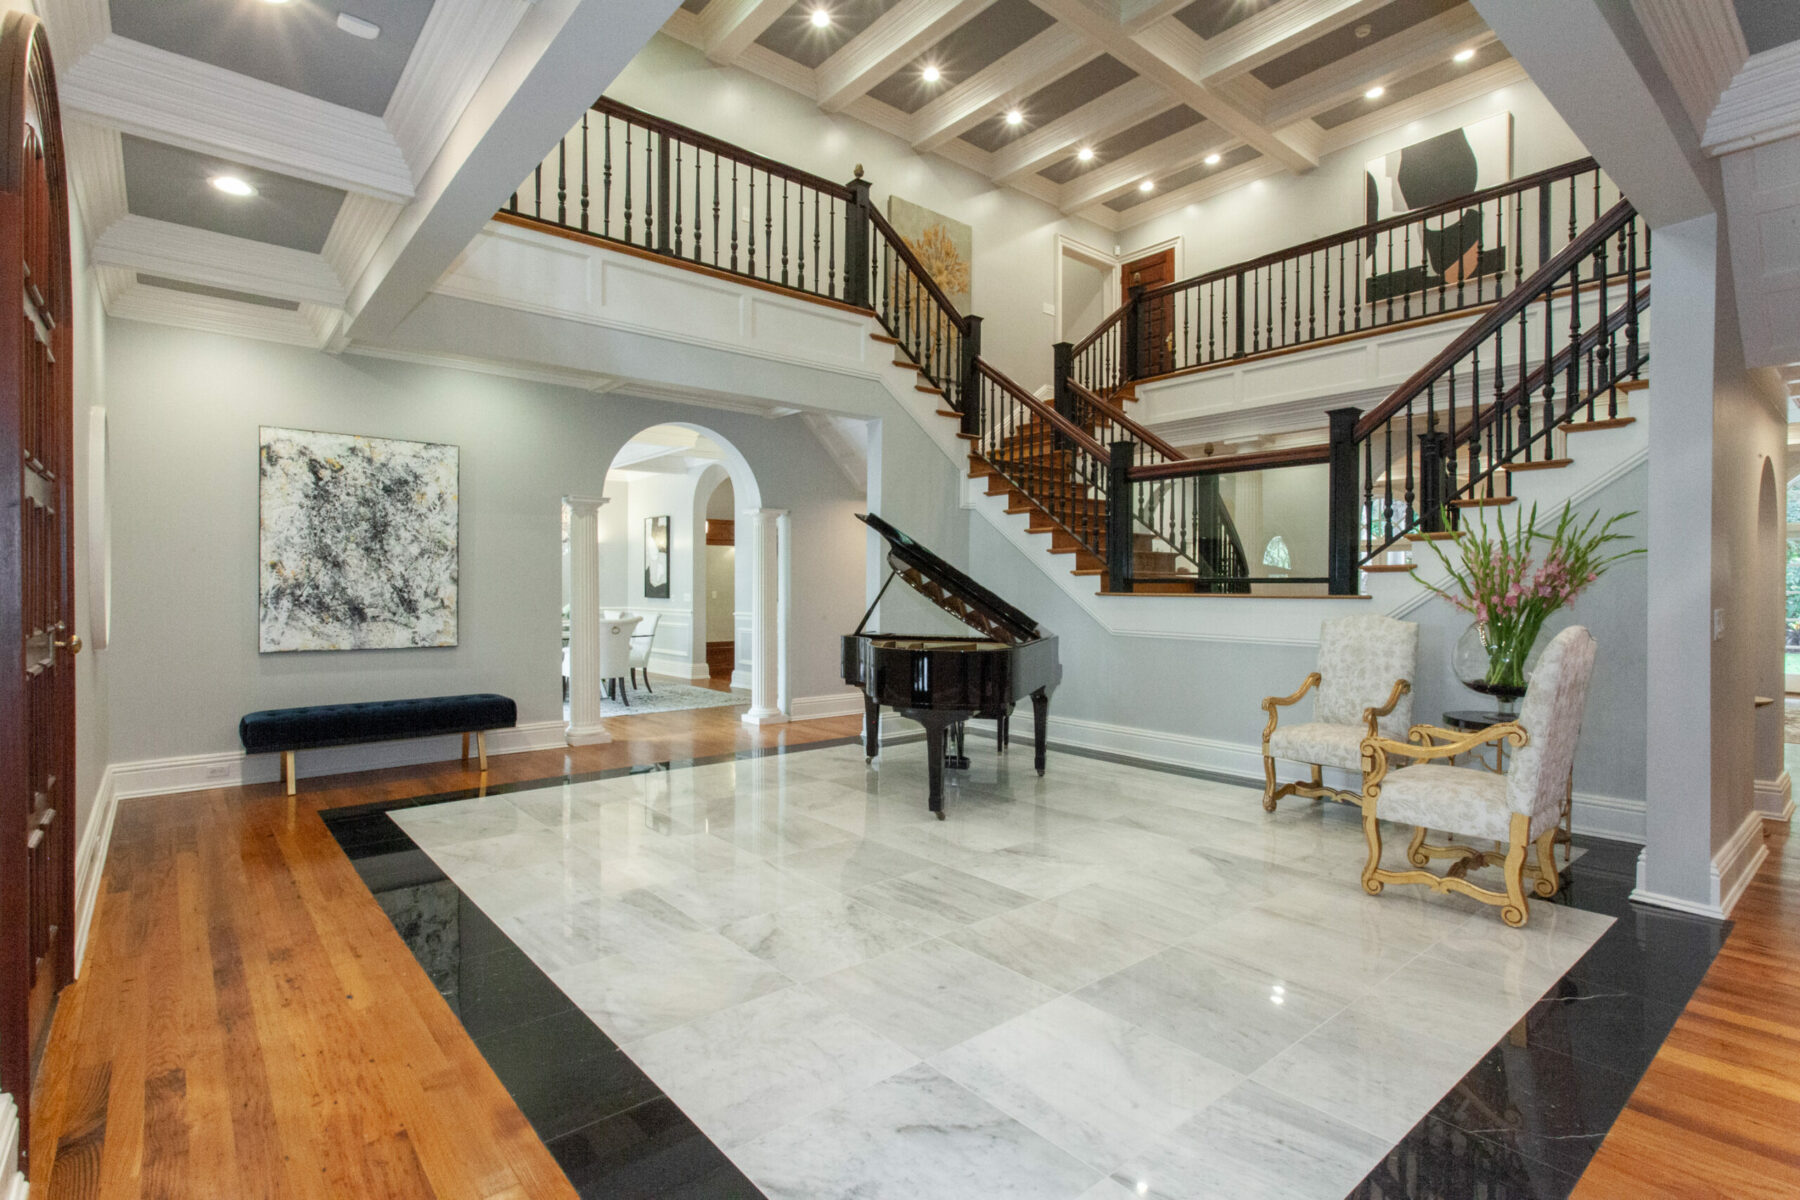 Stunning Tampa home with uber-luxurious details and a grand piano